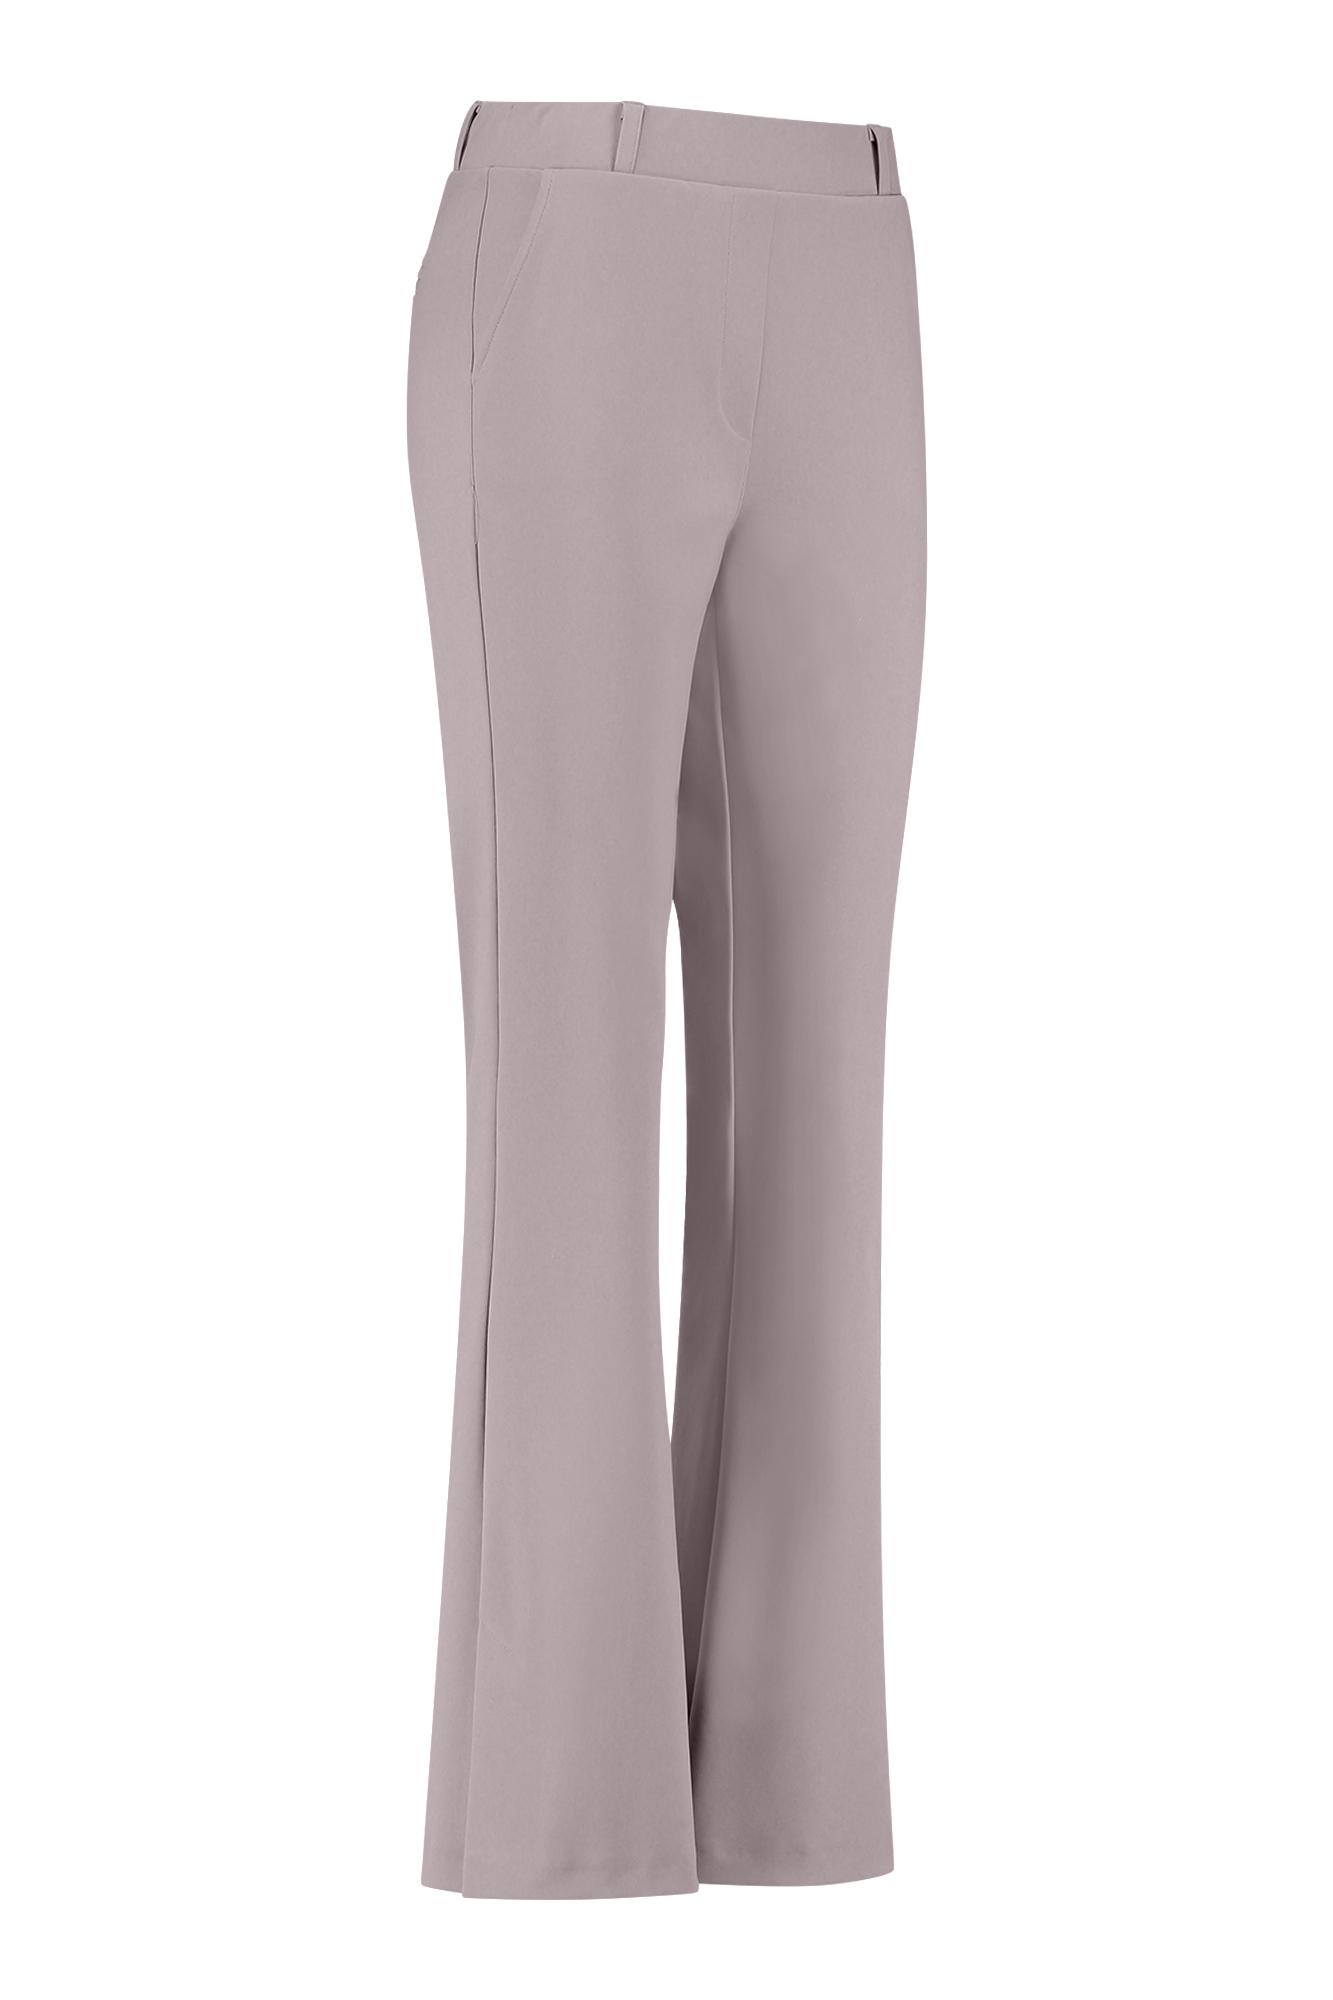 Studio Anneloes Mara Bonded Flair Trousers Taupe